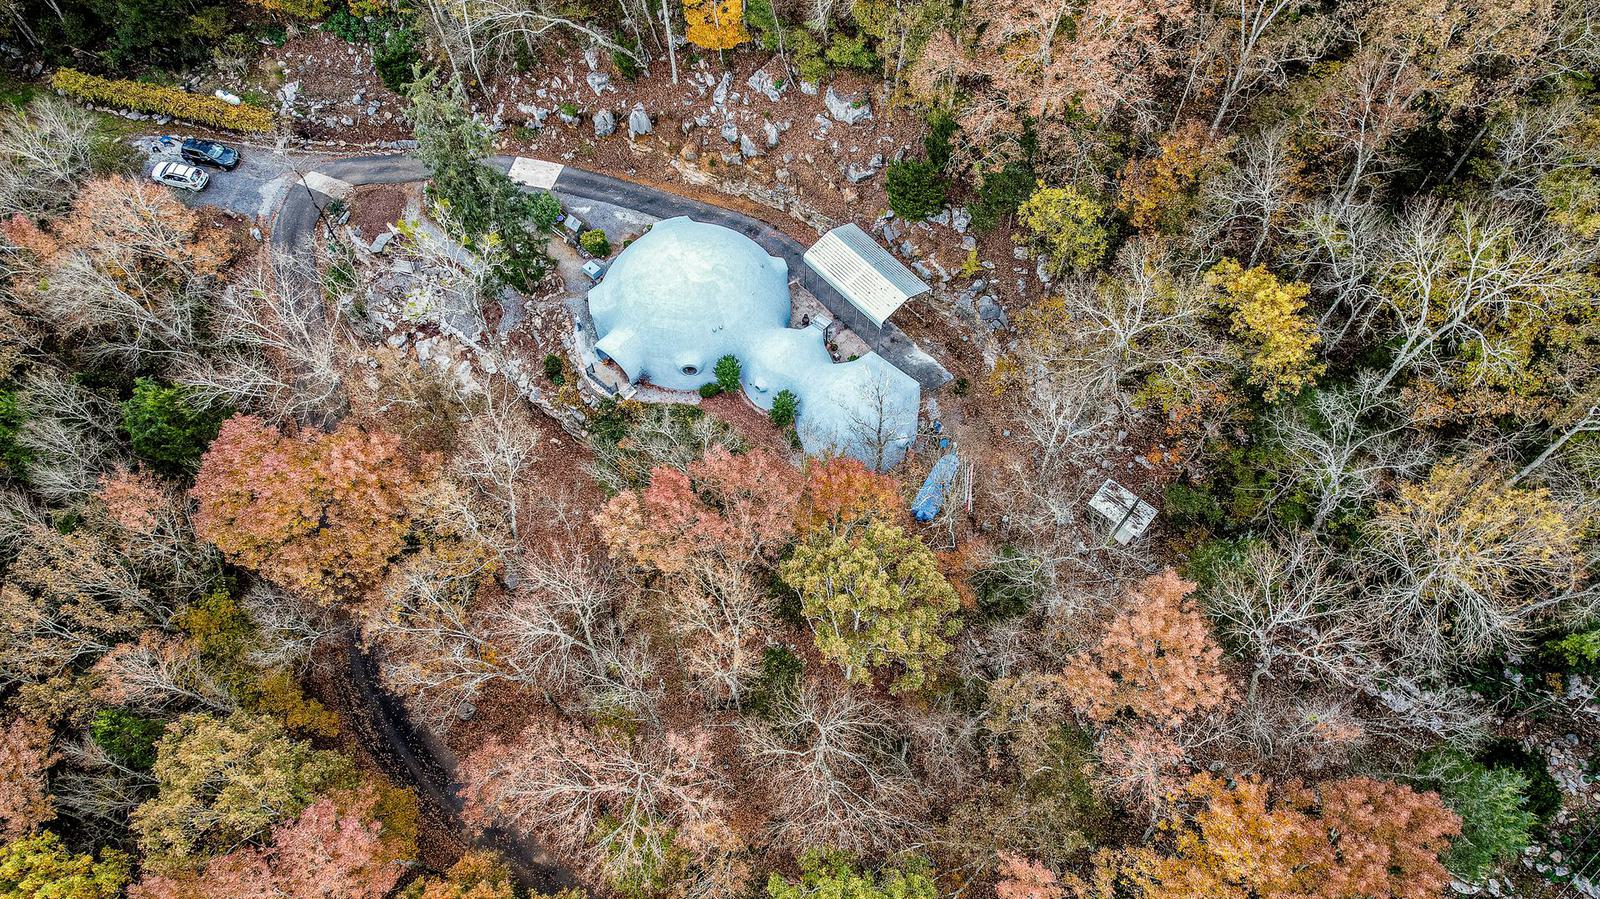 An aerial view of the tri-dome home among the trees.